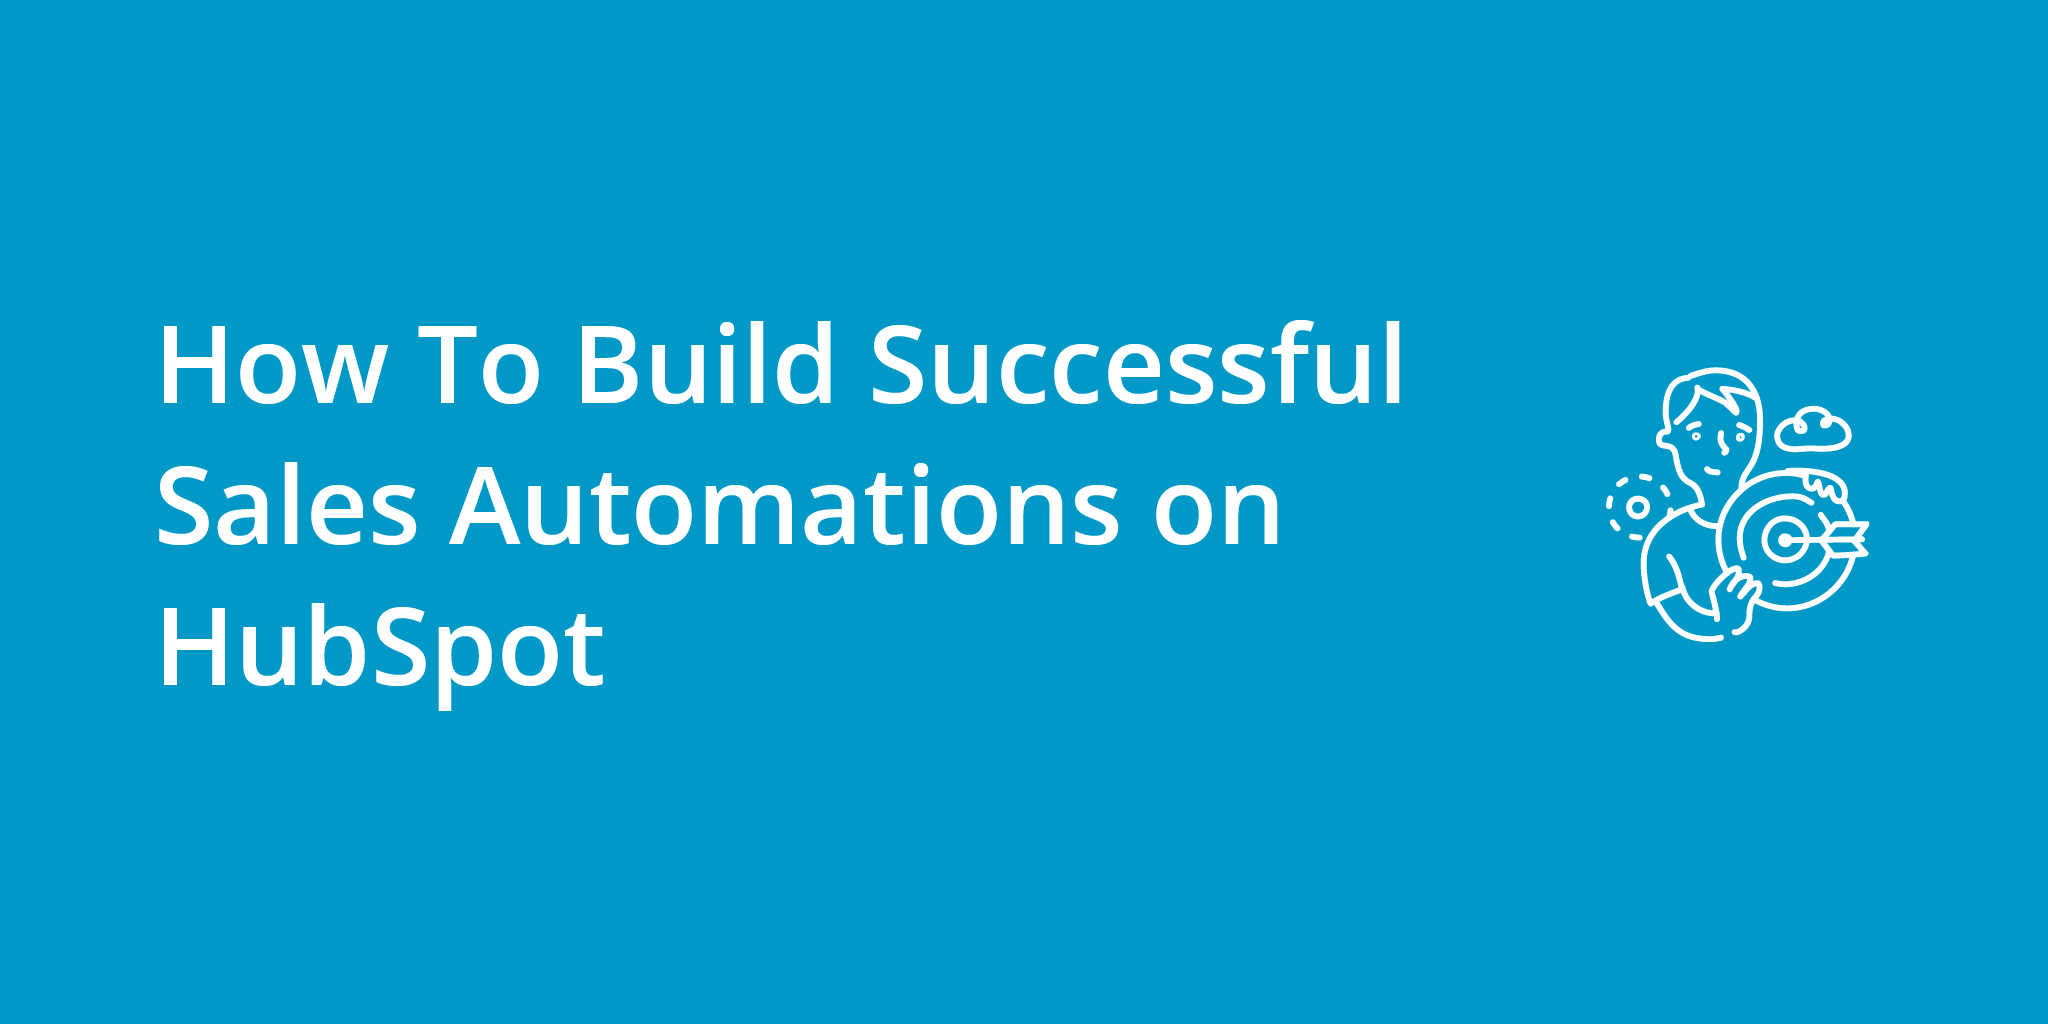 How To Build Successful Sales Automations on HubSpot | Telephones for business